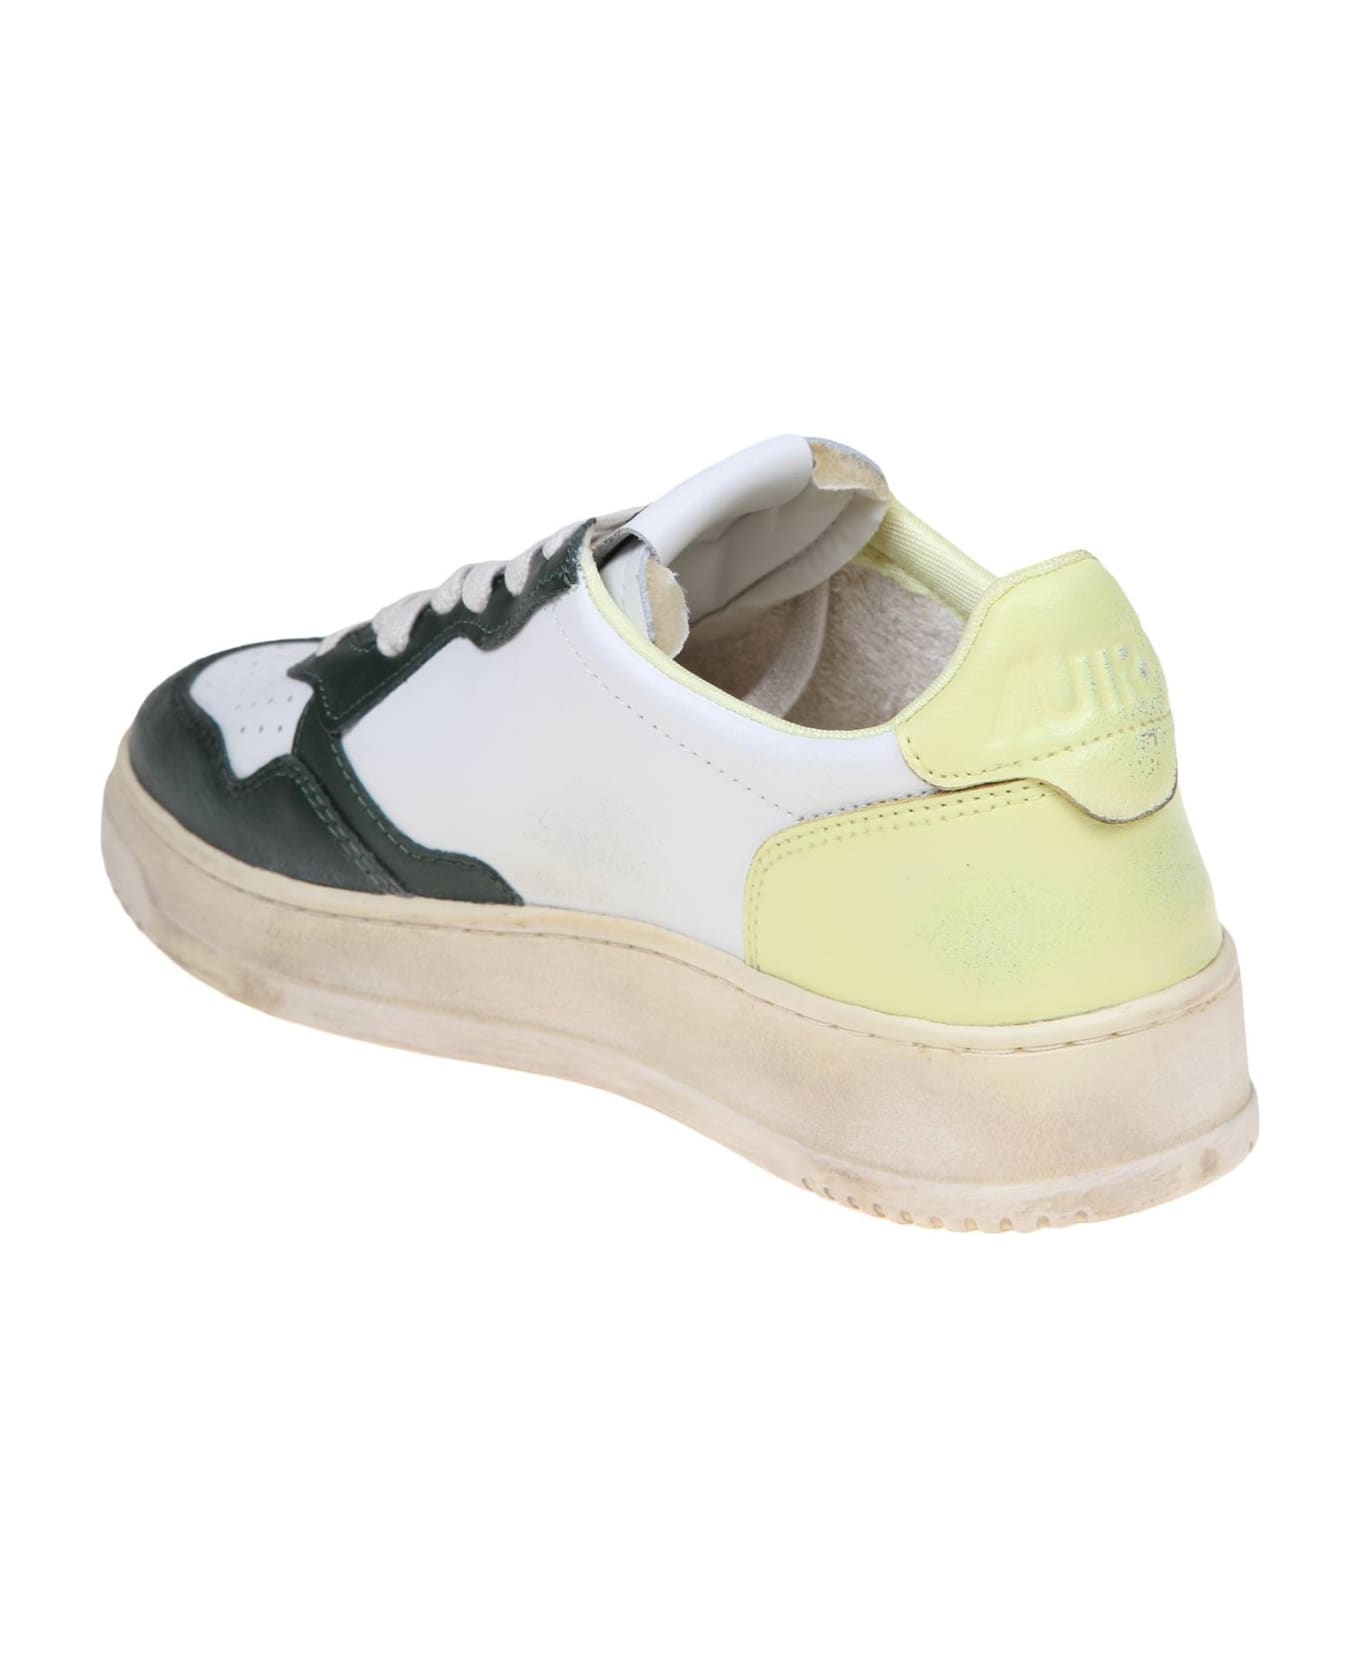 Autry Sneakers In Super Vintage Leather - Multicolor スニーカー